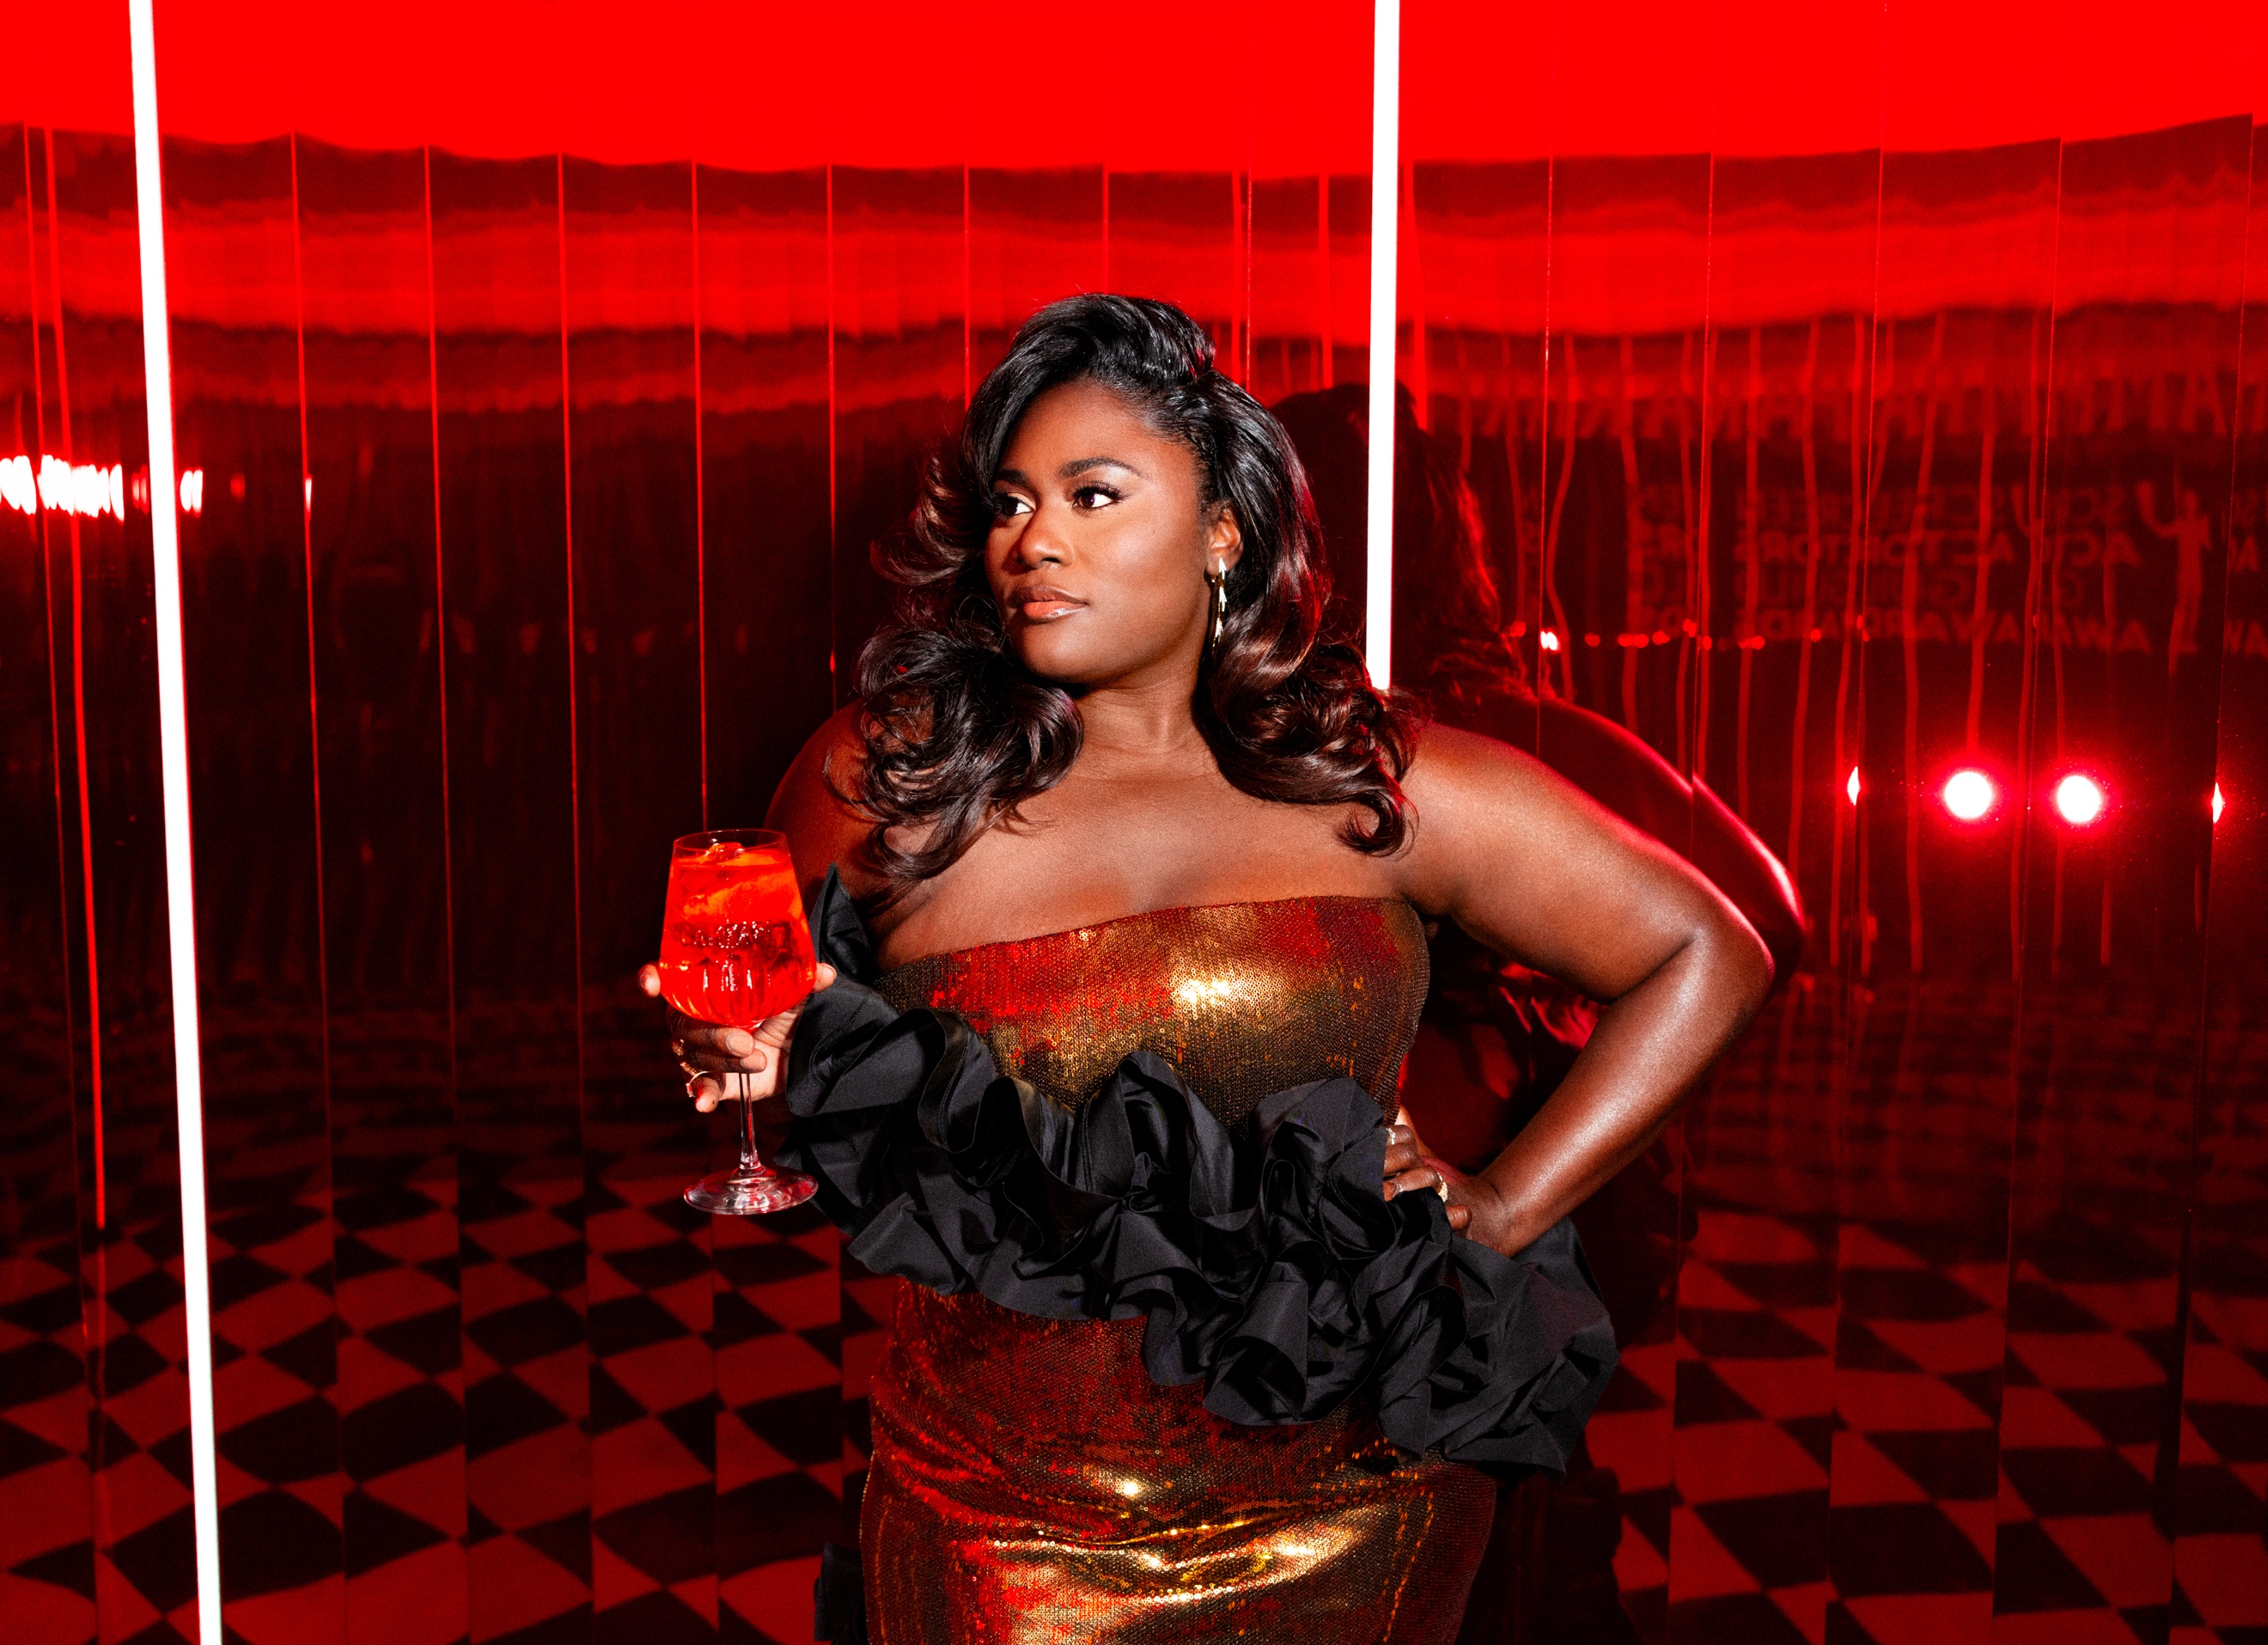 SAG Awards-nominee Danielle Brooks is ready to toast at ceremony